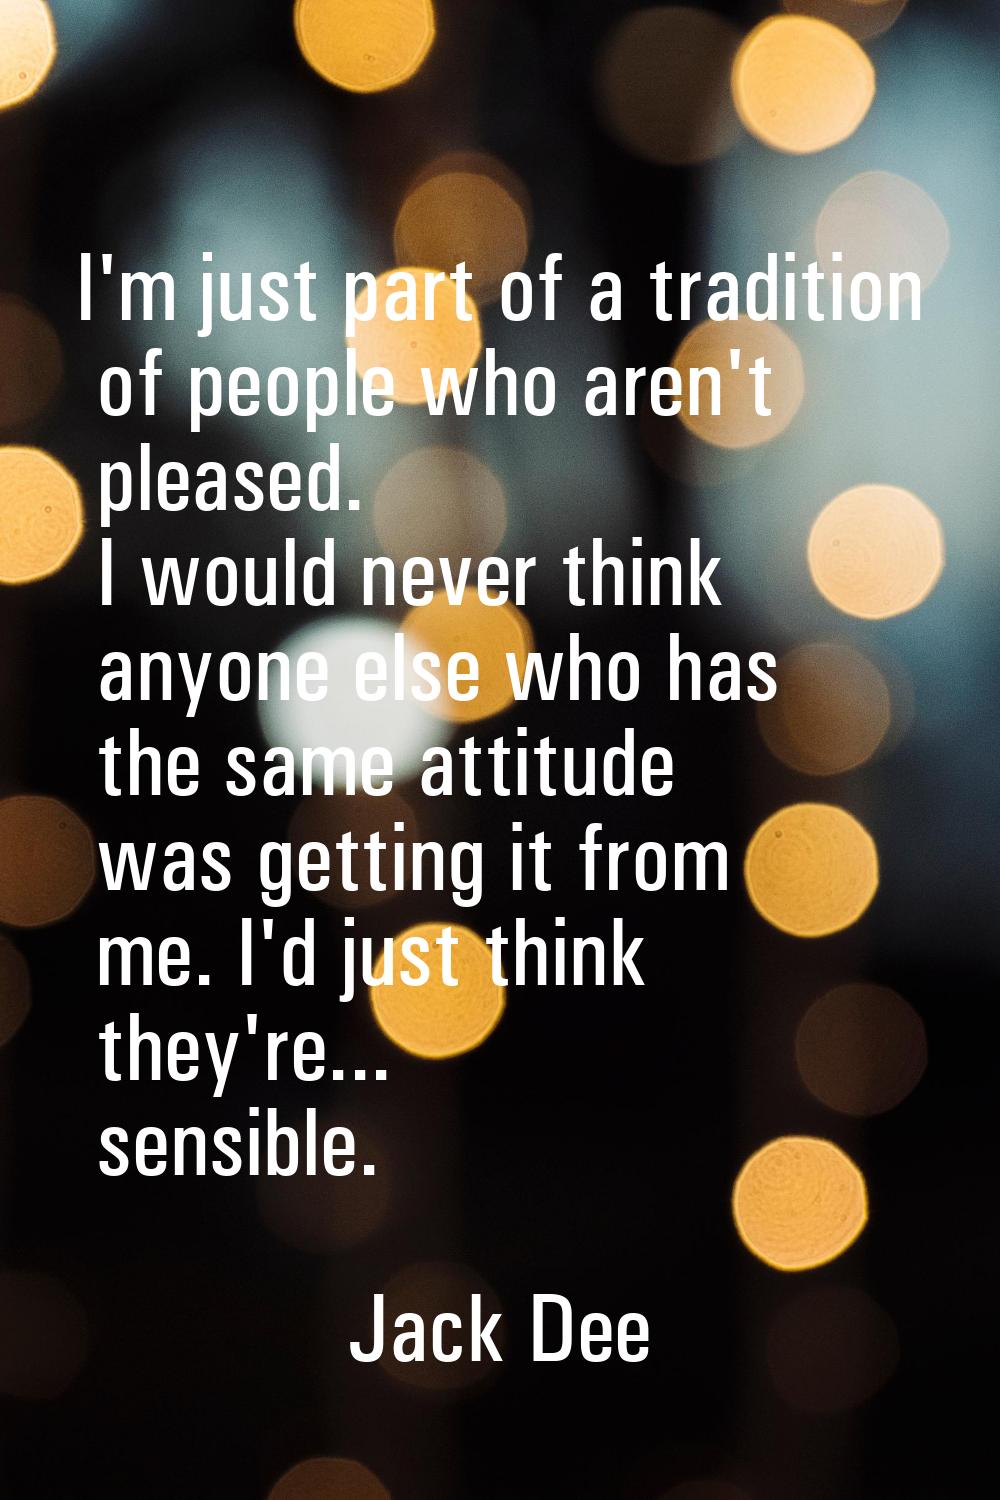 I'm just part of a tradition of people who aren't pleased. I would never think anyone else who has 